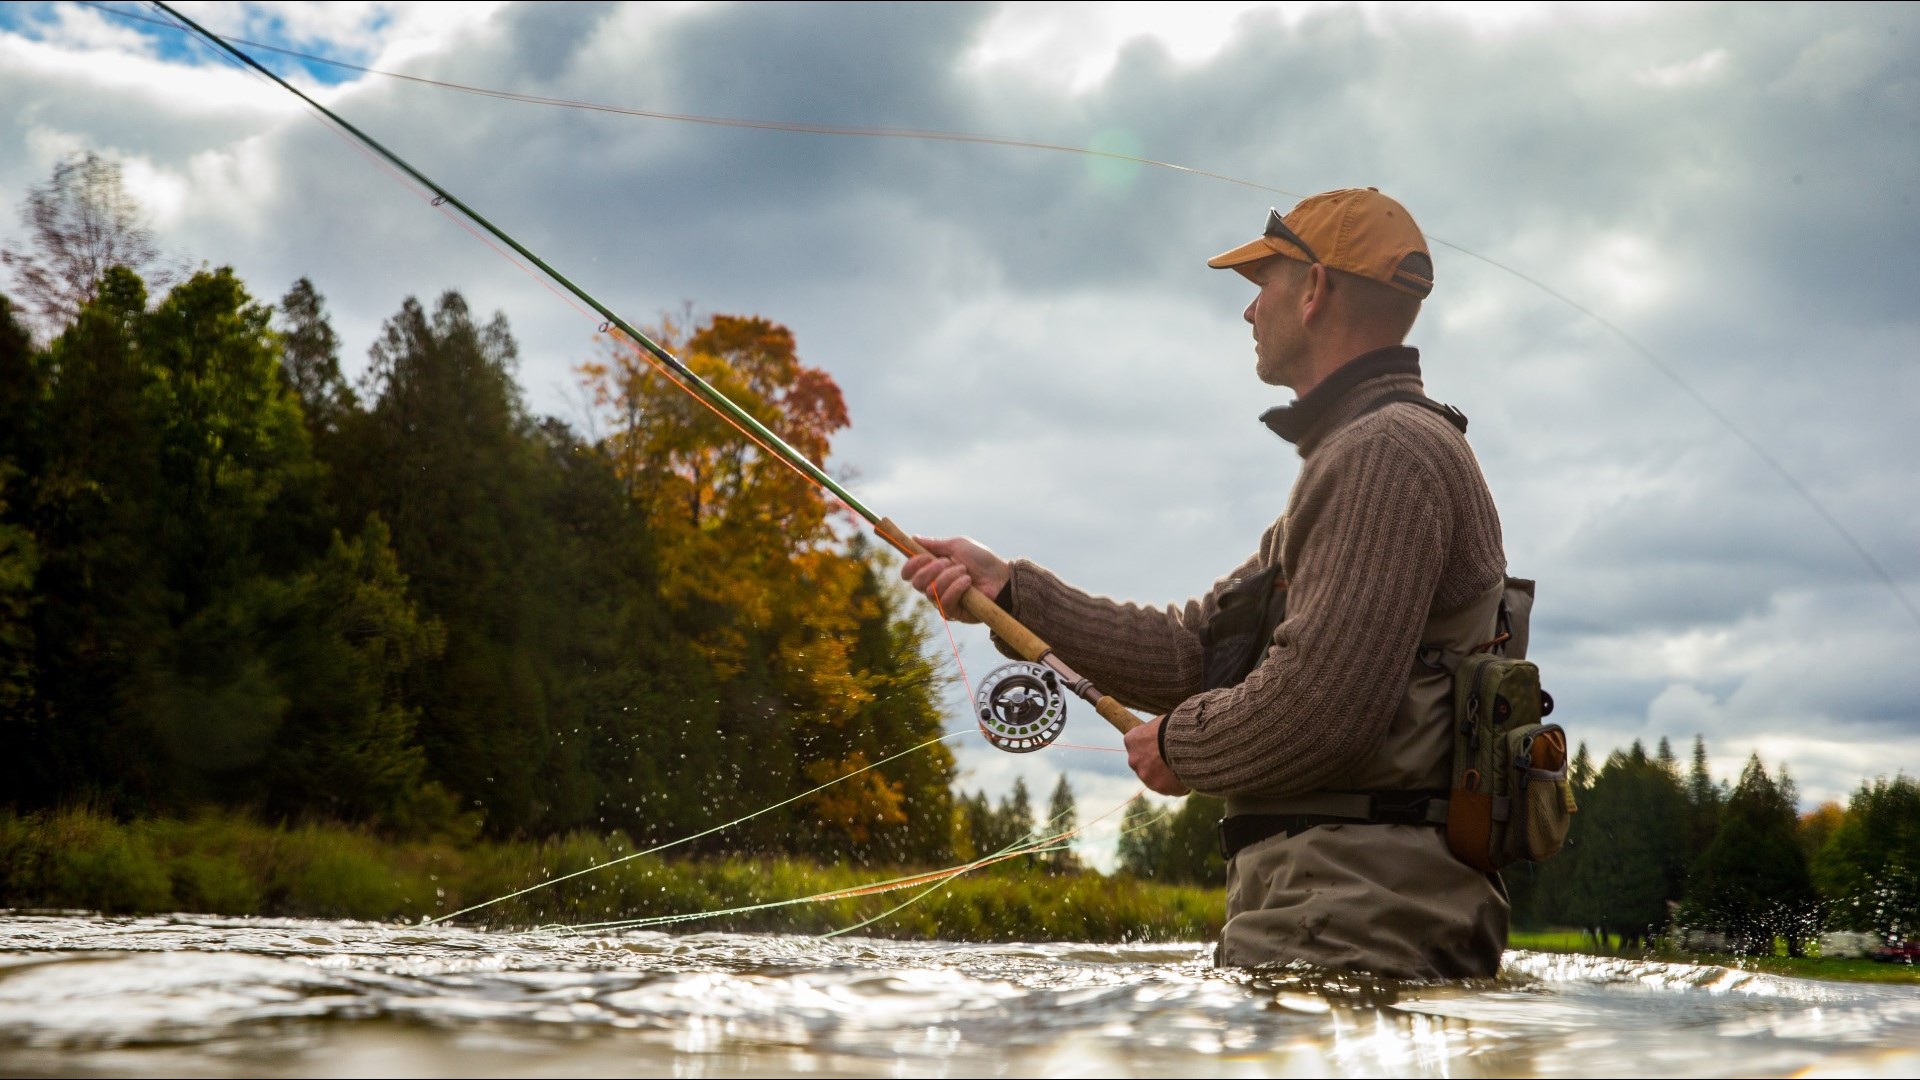 Fly Fishing & The Practice of Law